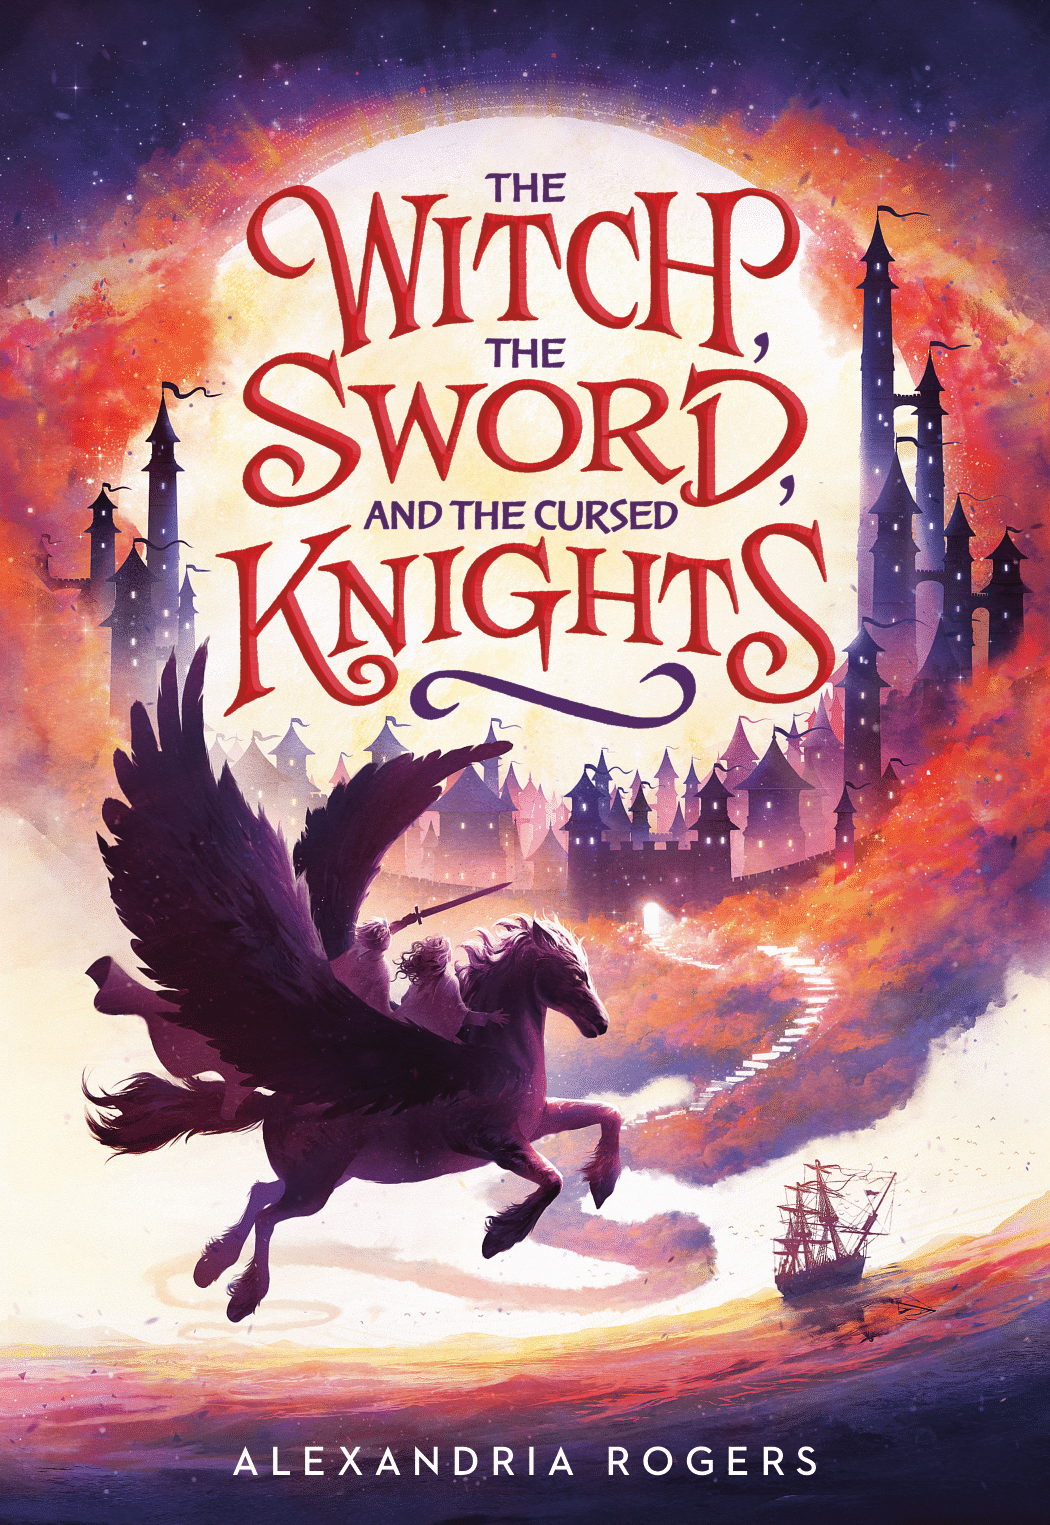 The Witch, the Sword, and the Cursed Knights (The Witch, the Sword, and the Cursed Knights, #1)